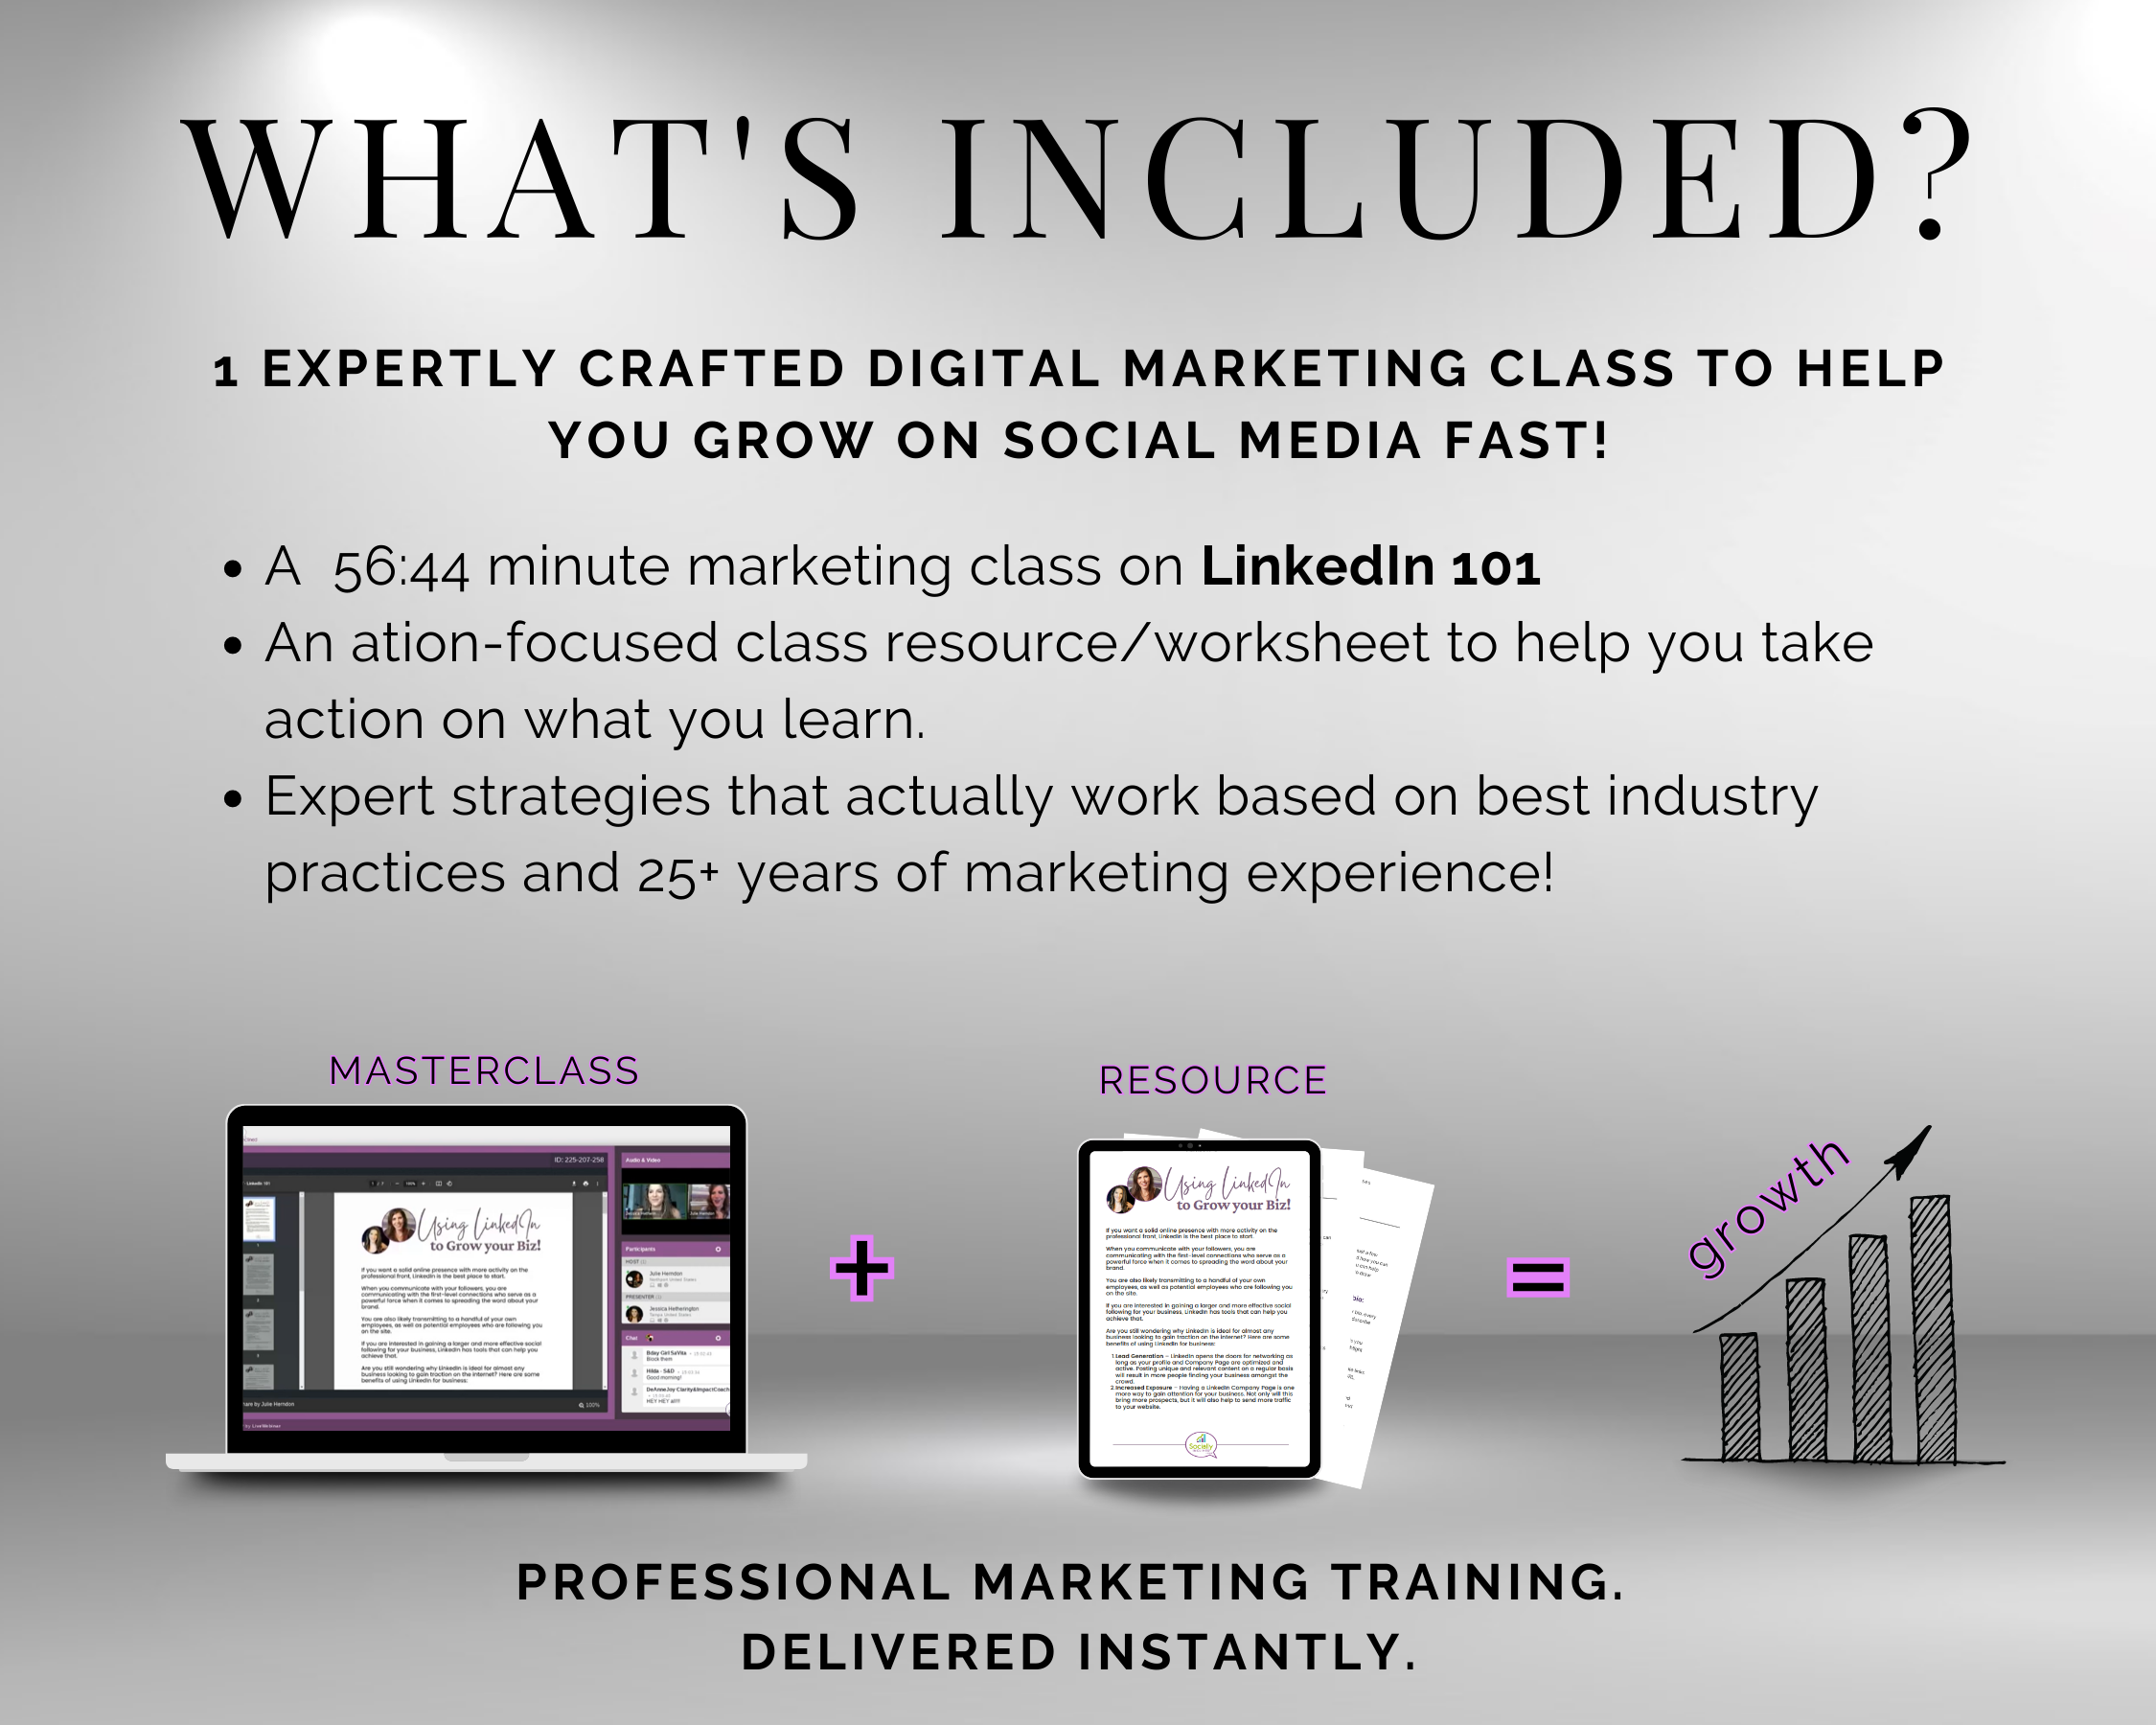 The digital marketing class is missing the TAT - LinkedIn 101 Masterclass description. Could you please provide the TAT - LinkedIn 101 Masterclass description?